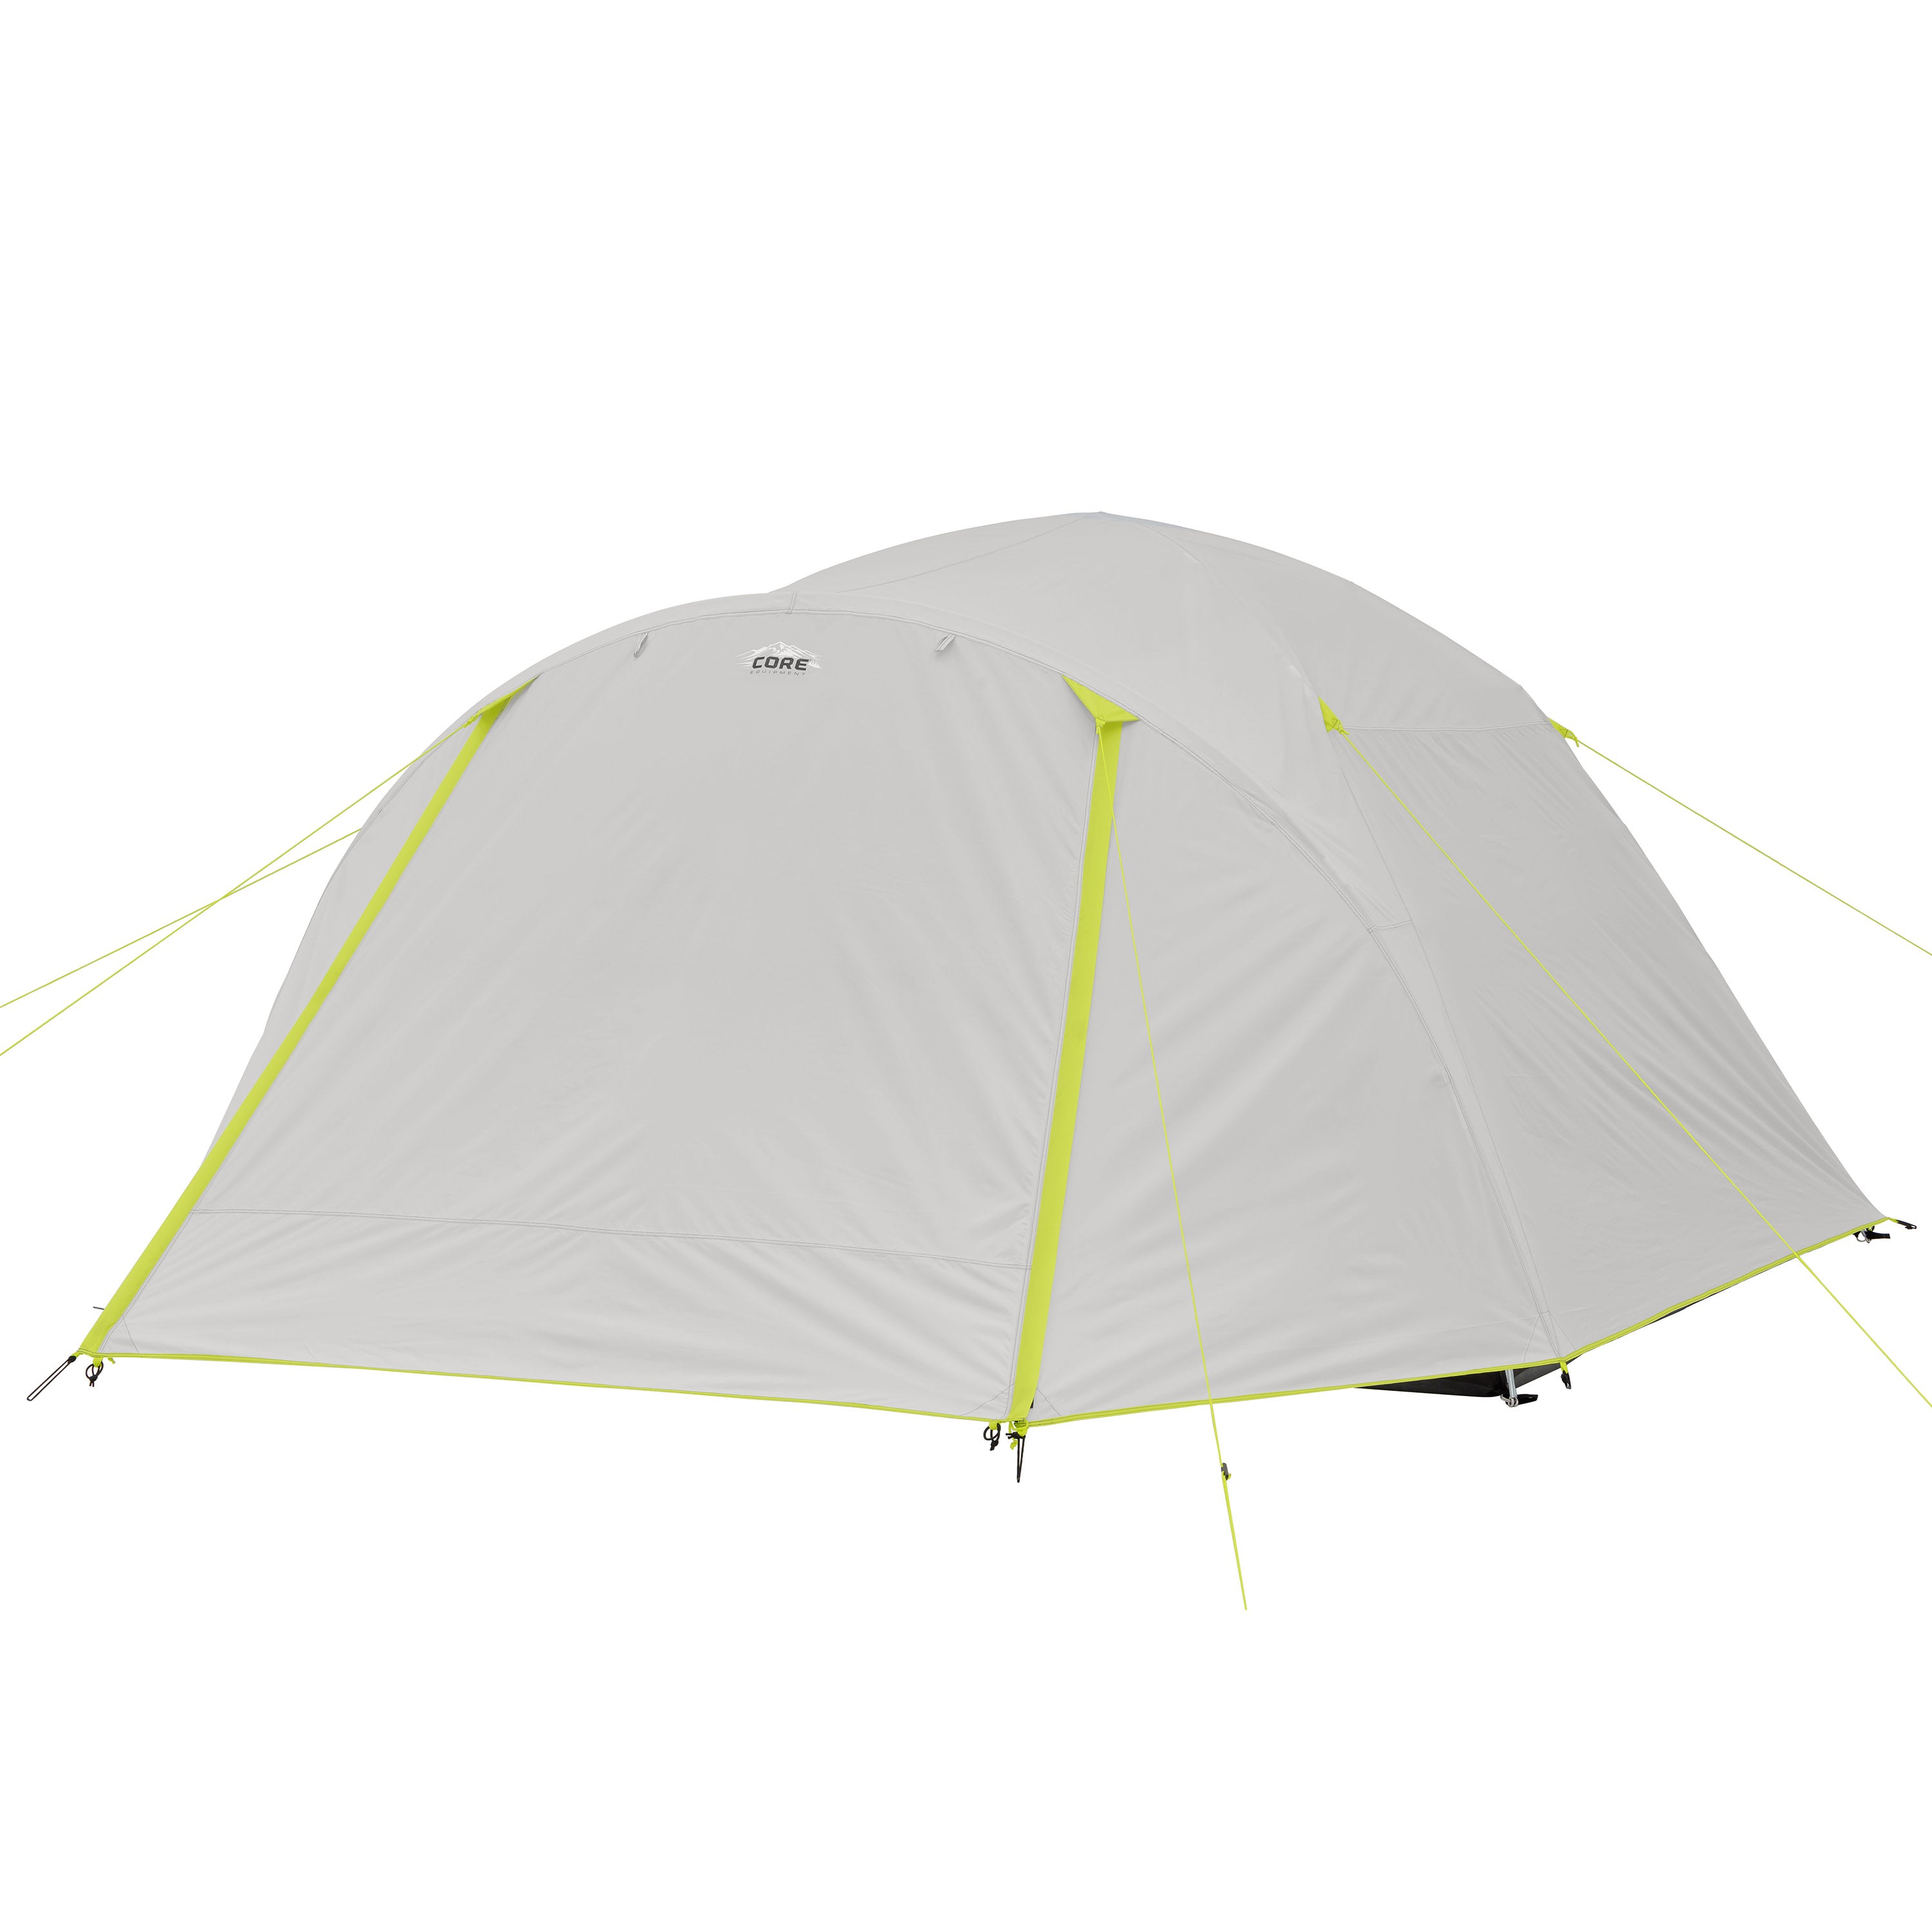 6 Person Lighted Dome Tent with Full Rainfly 10' x 9